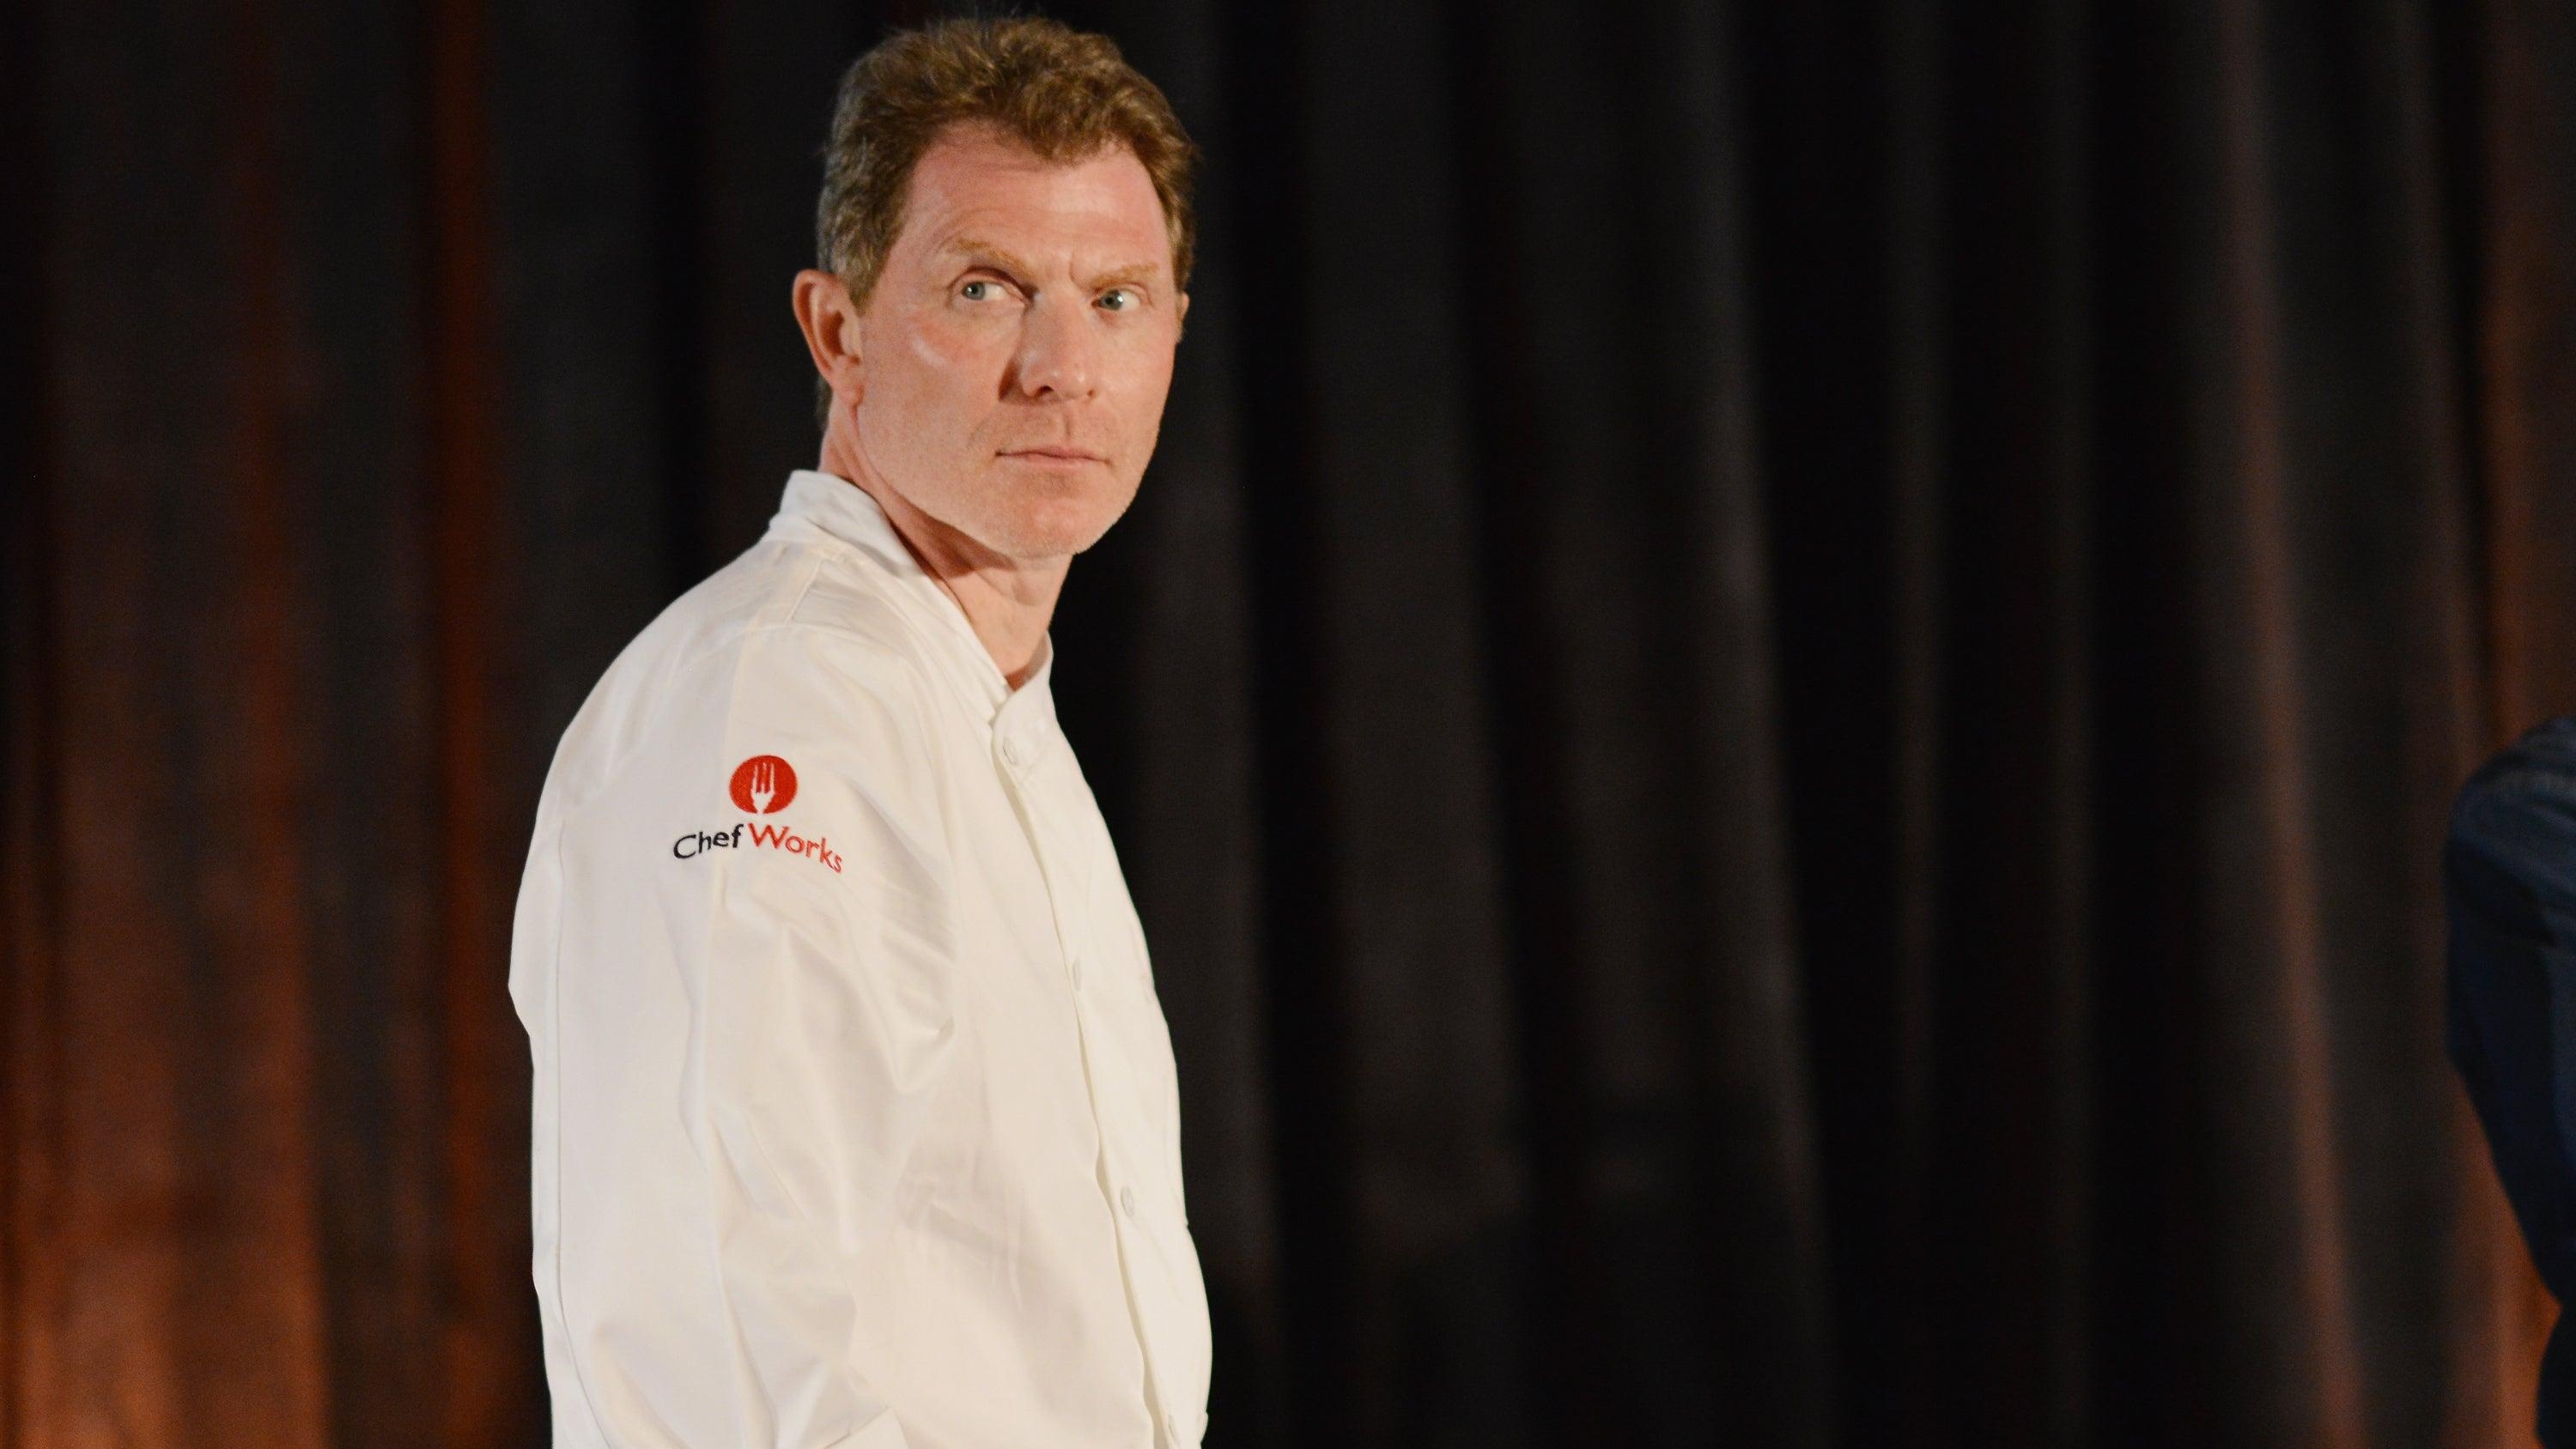 Bobby Flay is leaving Food Network after 27 years